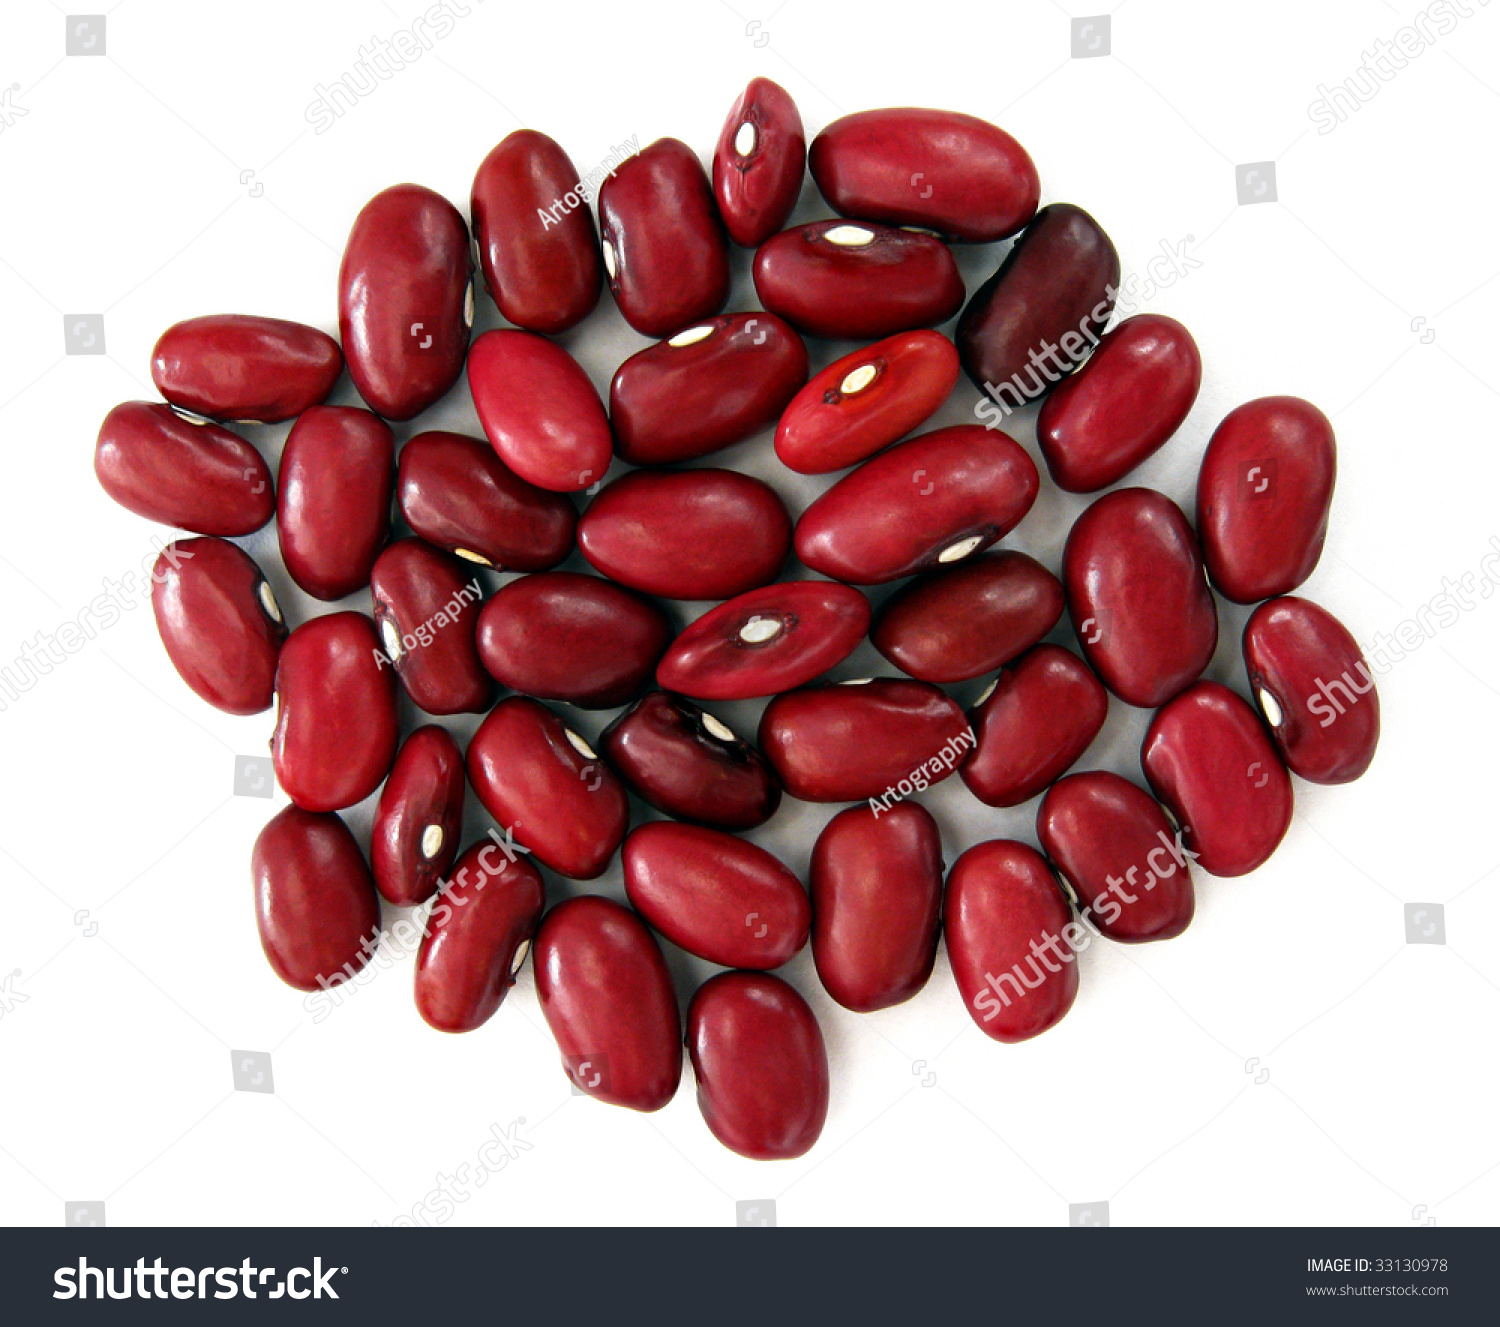 Red beans #33130978